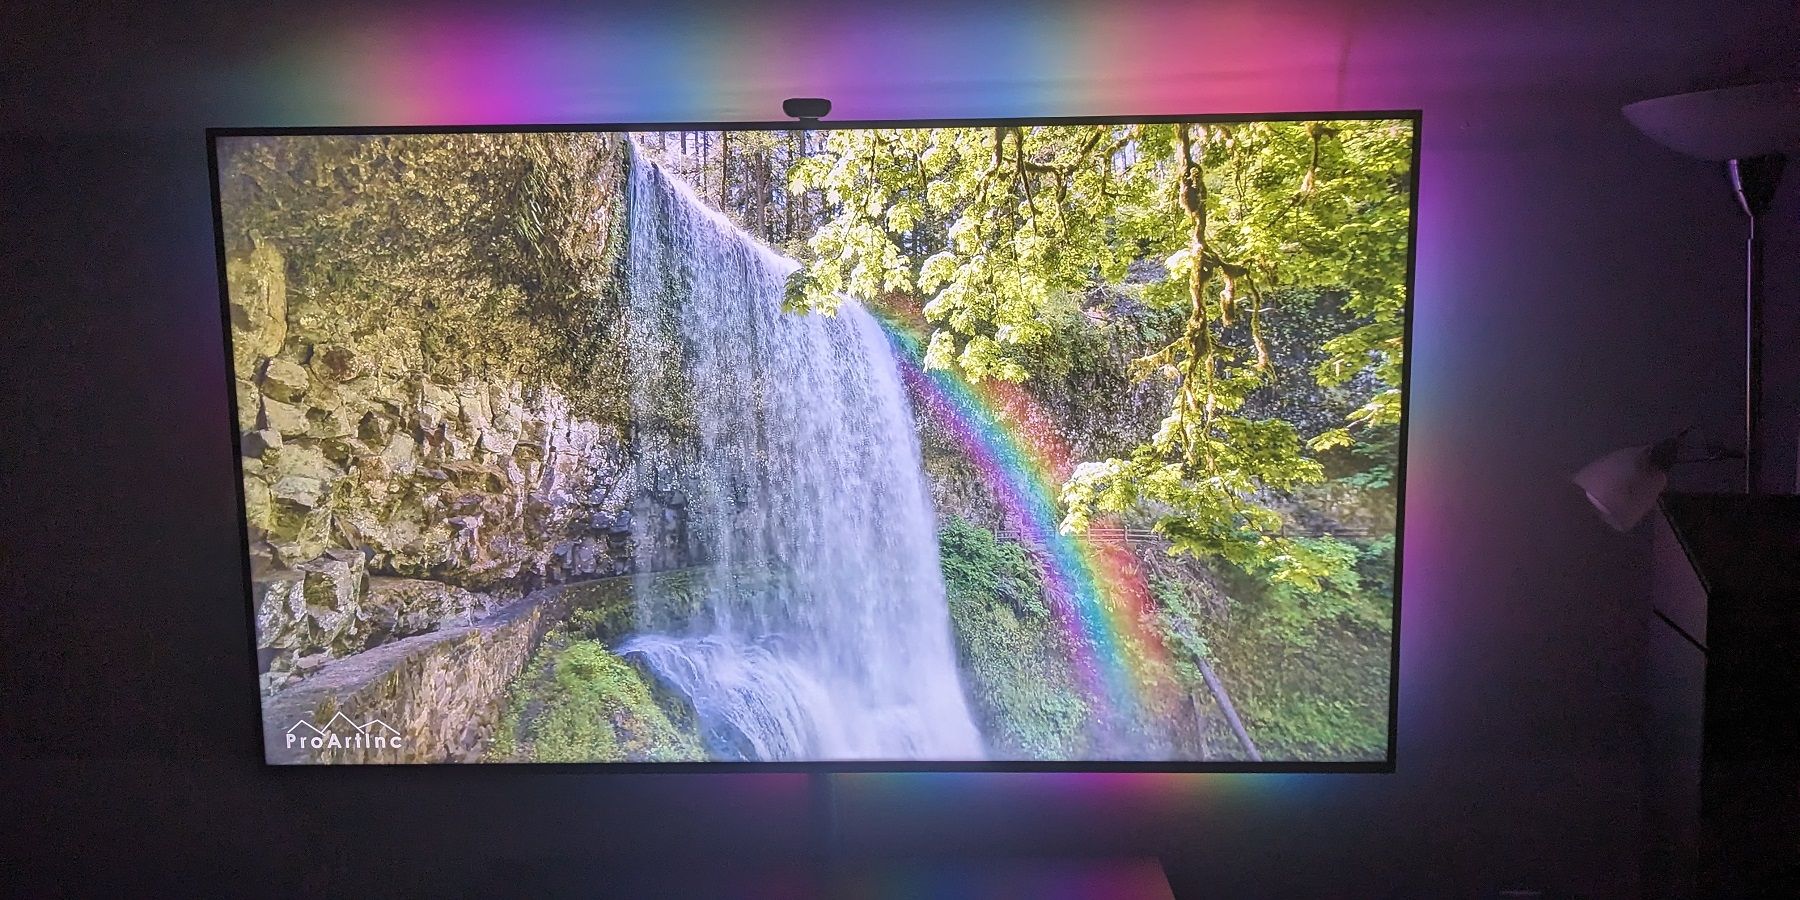 Govee Envisual TV Backlight T2 review